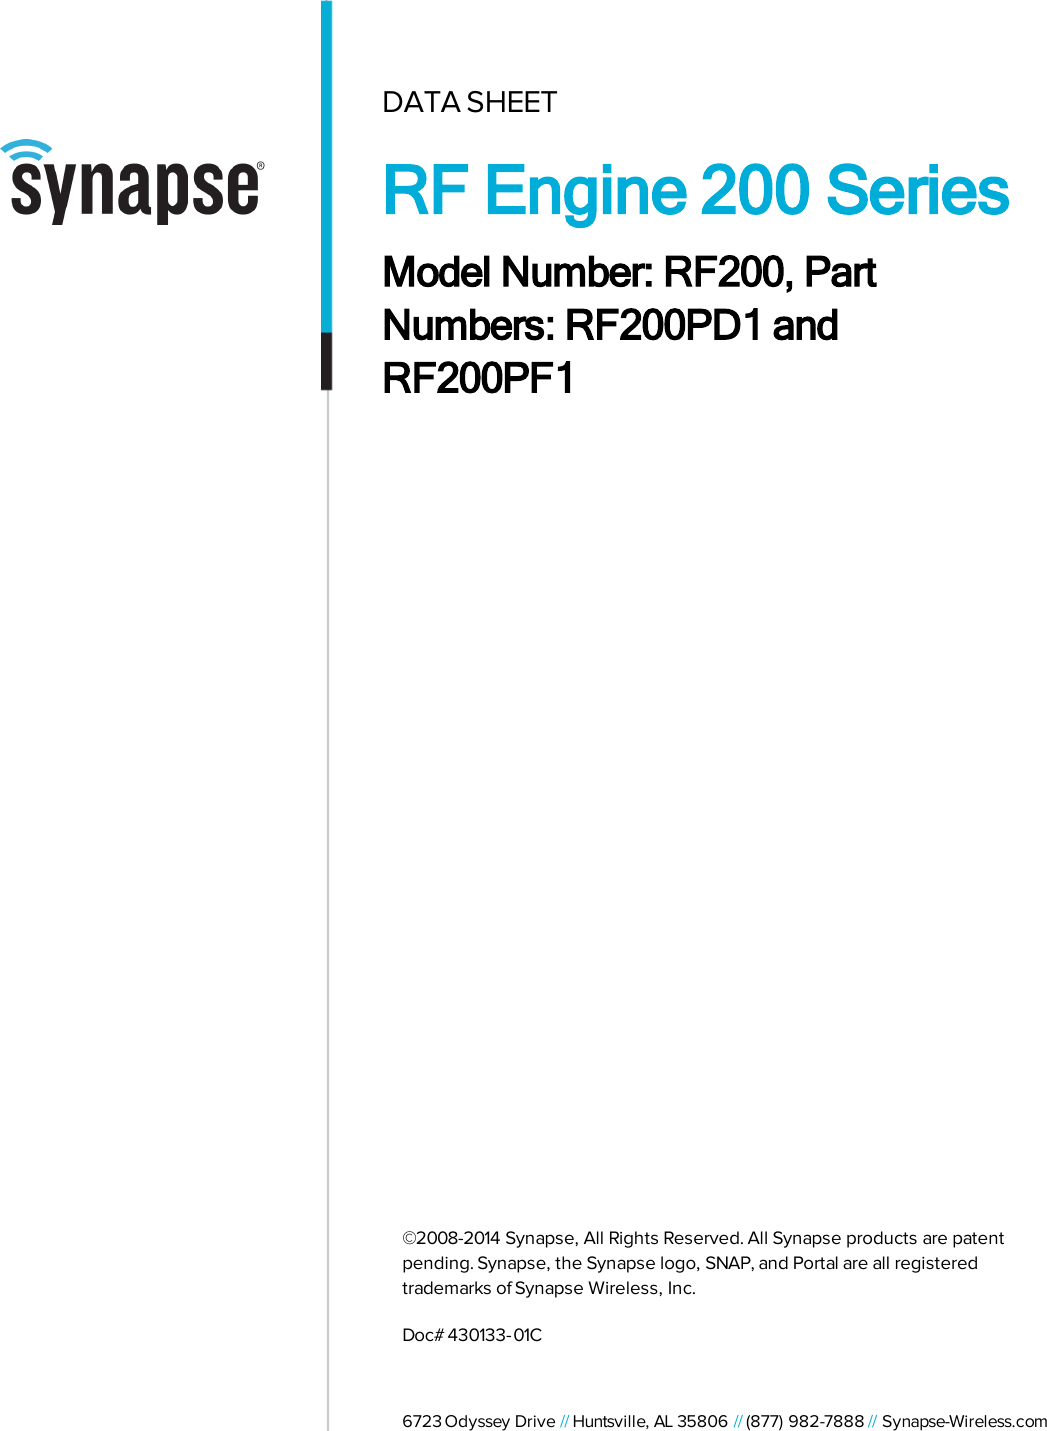 DATA SHEETRF Engine 200 SeriesModel Number:RF200, PartNumbers: RF200PD1 andRF200PF1©2008-2014 Synapse, All Rights Reserved. All Synapse products are patentpending. Synapse, the Synapse logo, SNAP, and Portal are all registeredtrademarks of Synapse Wireless, Inc.Doc# 430133-01C6723 Odyssey Drive // Huntsville, AL 35806 // (877) 982-7888 // Synapse-Wireless.com